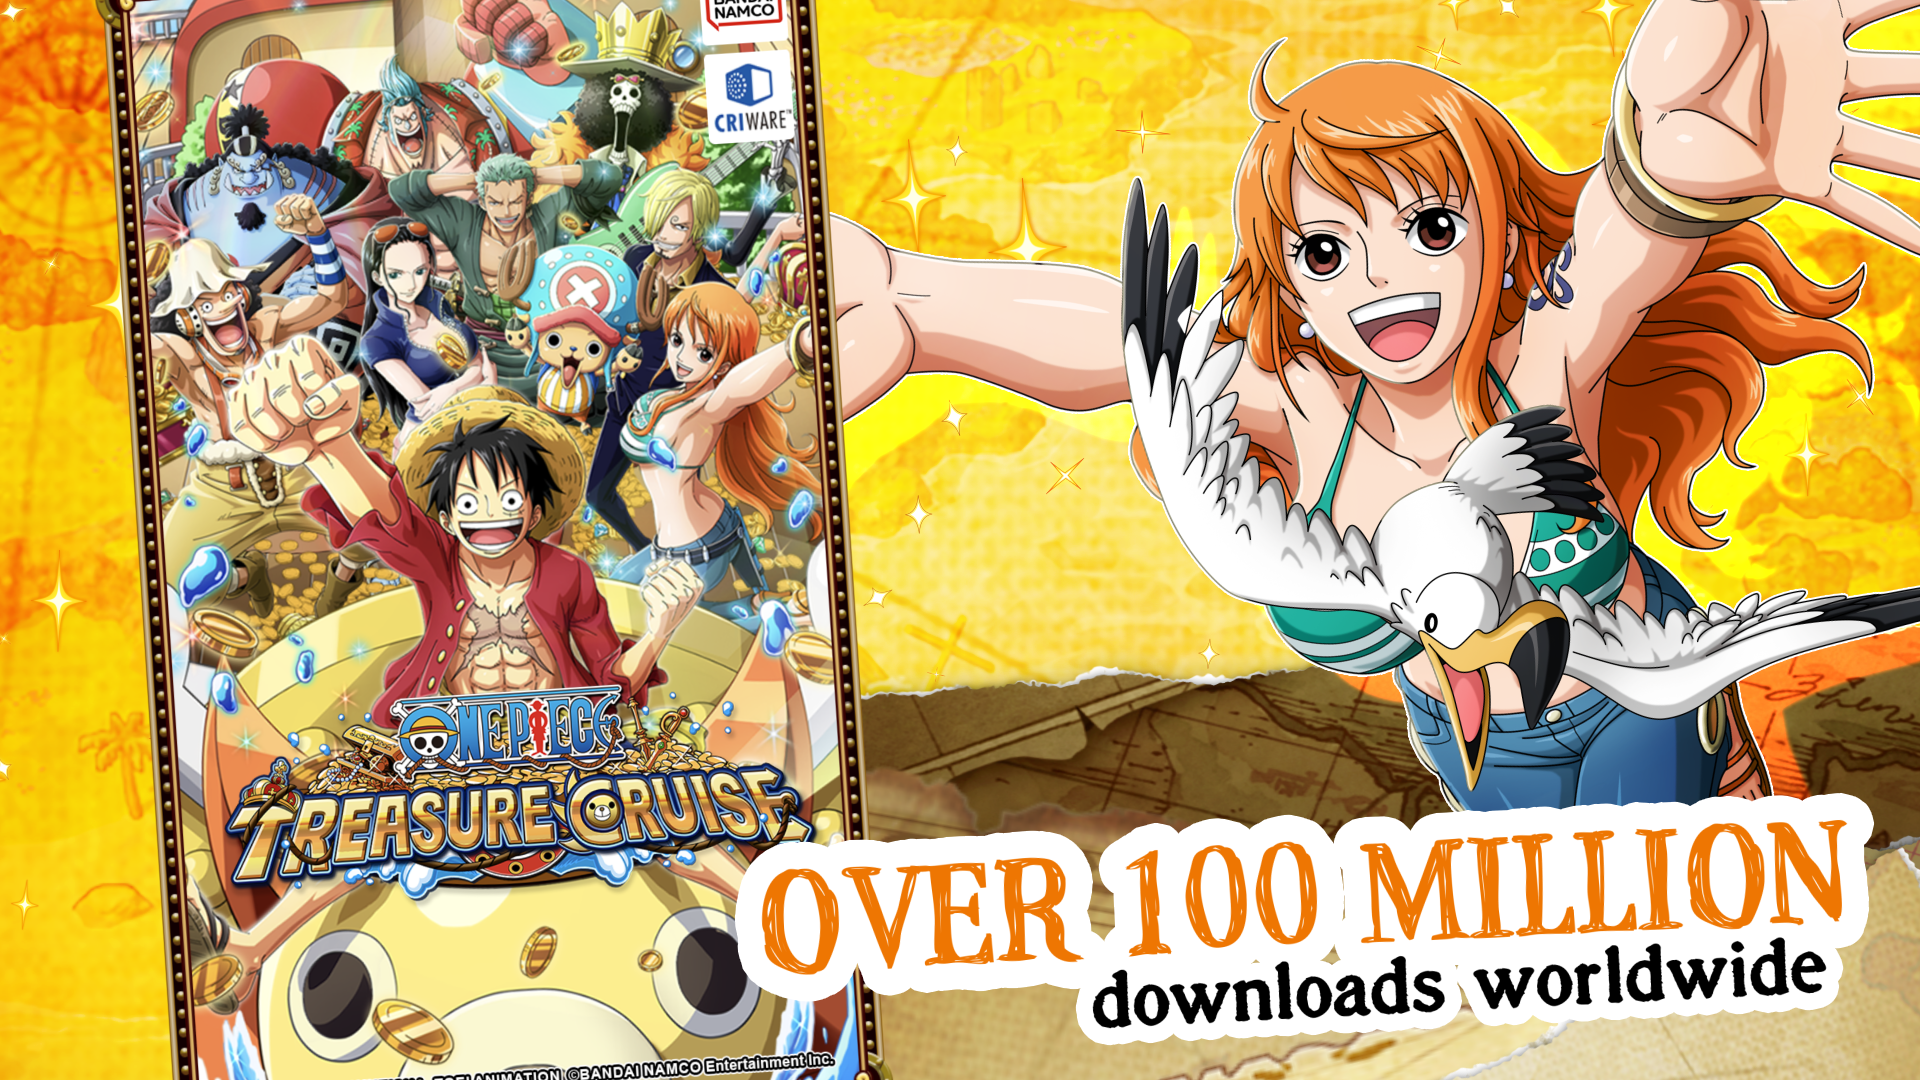 Download Going Merry (One Piece) wallpapers for mobile phone